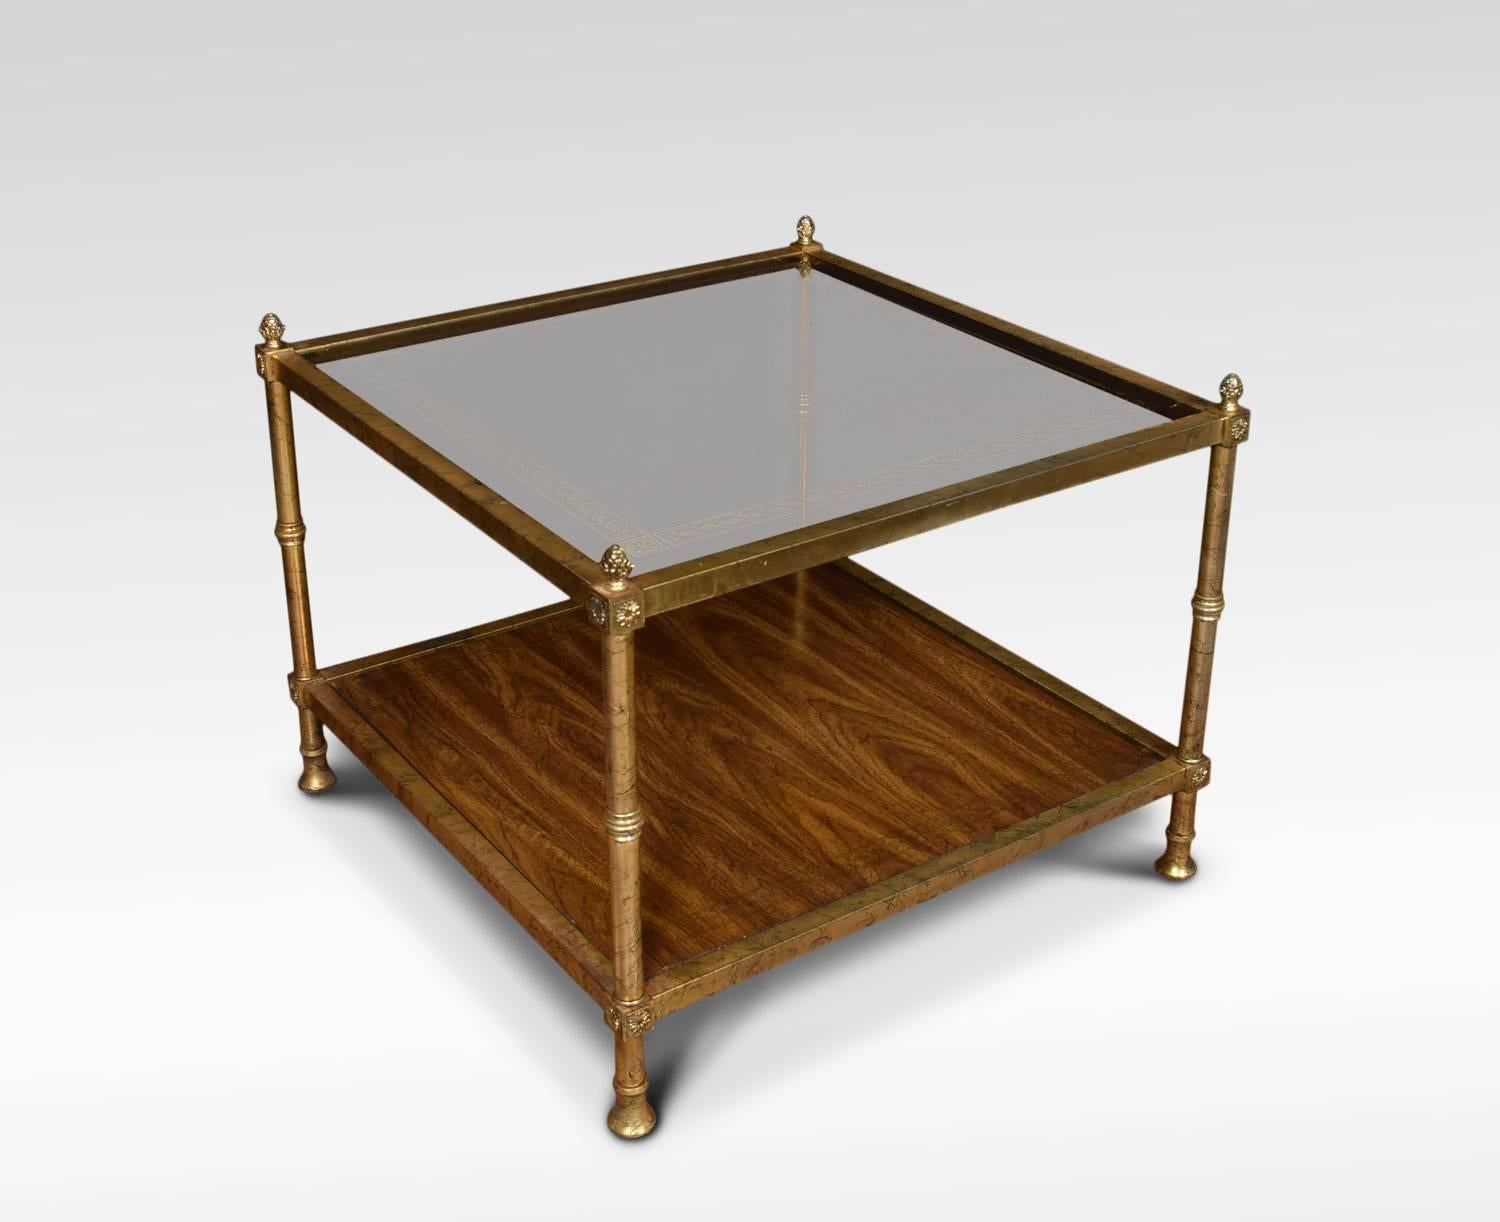 20th Century Brass and Glass Coffee Table in the Manner of Maison Jansen